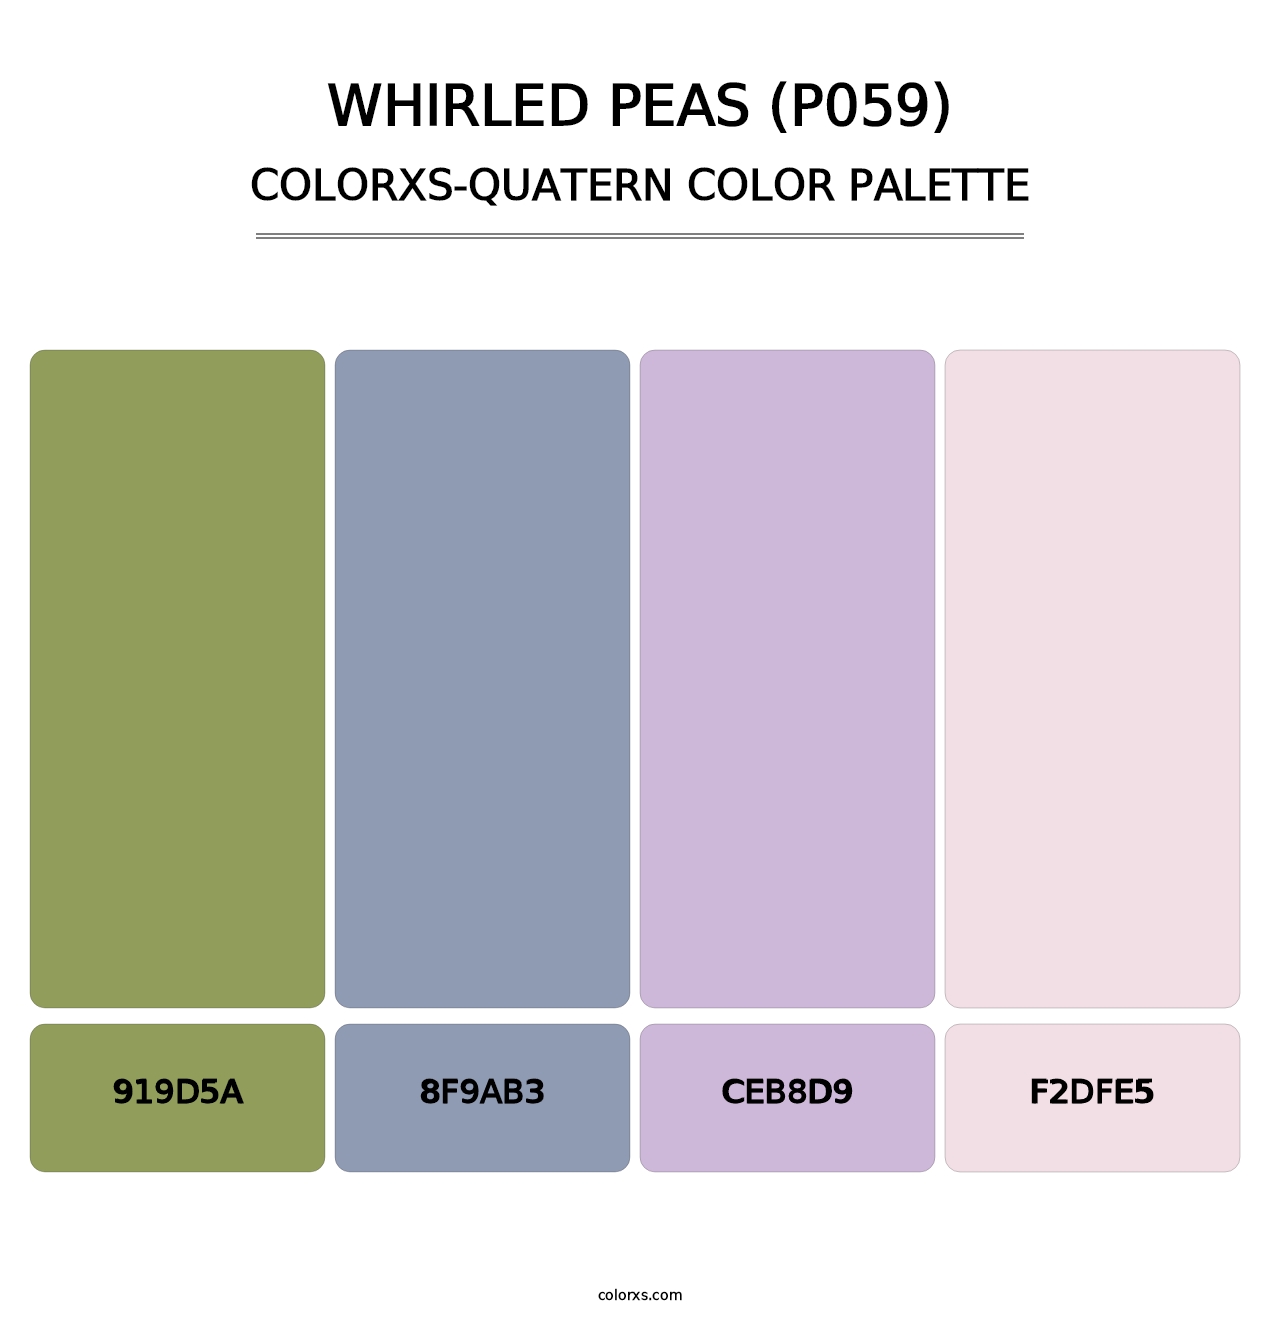 Whirled Peas (P059) - Colorxs Quatern Palette